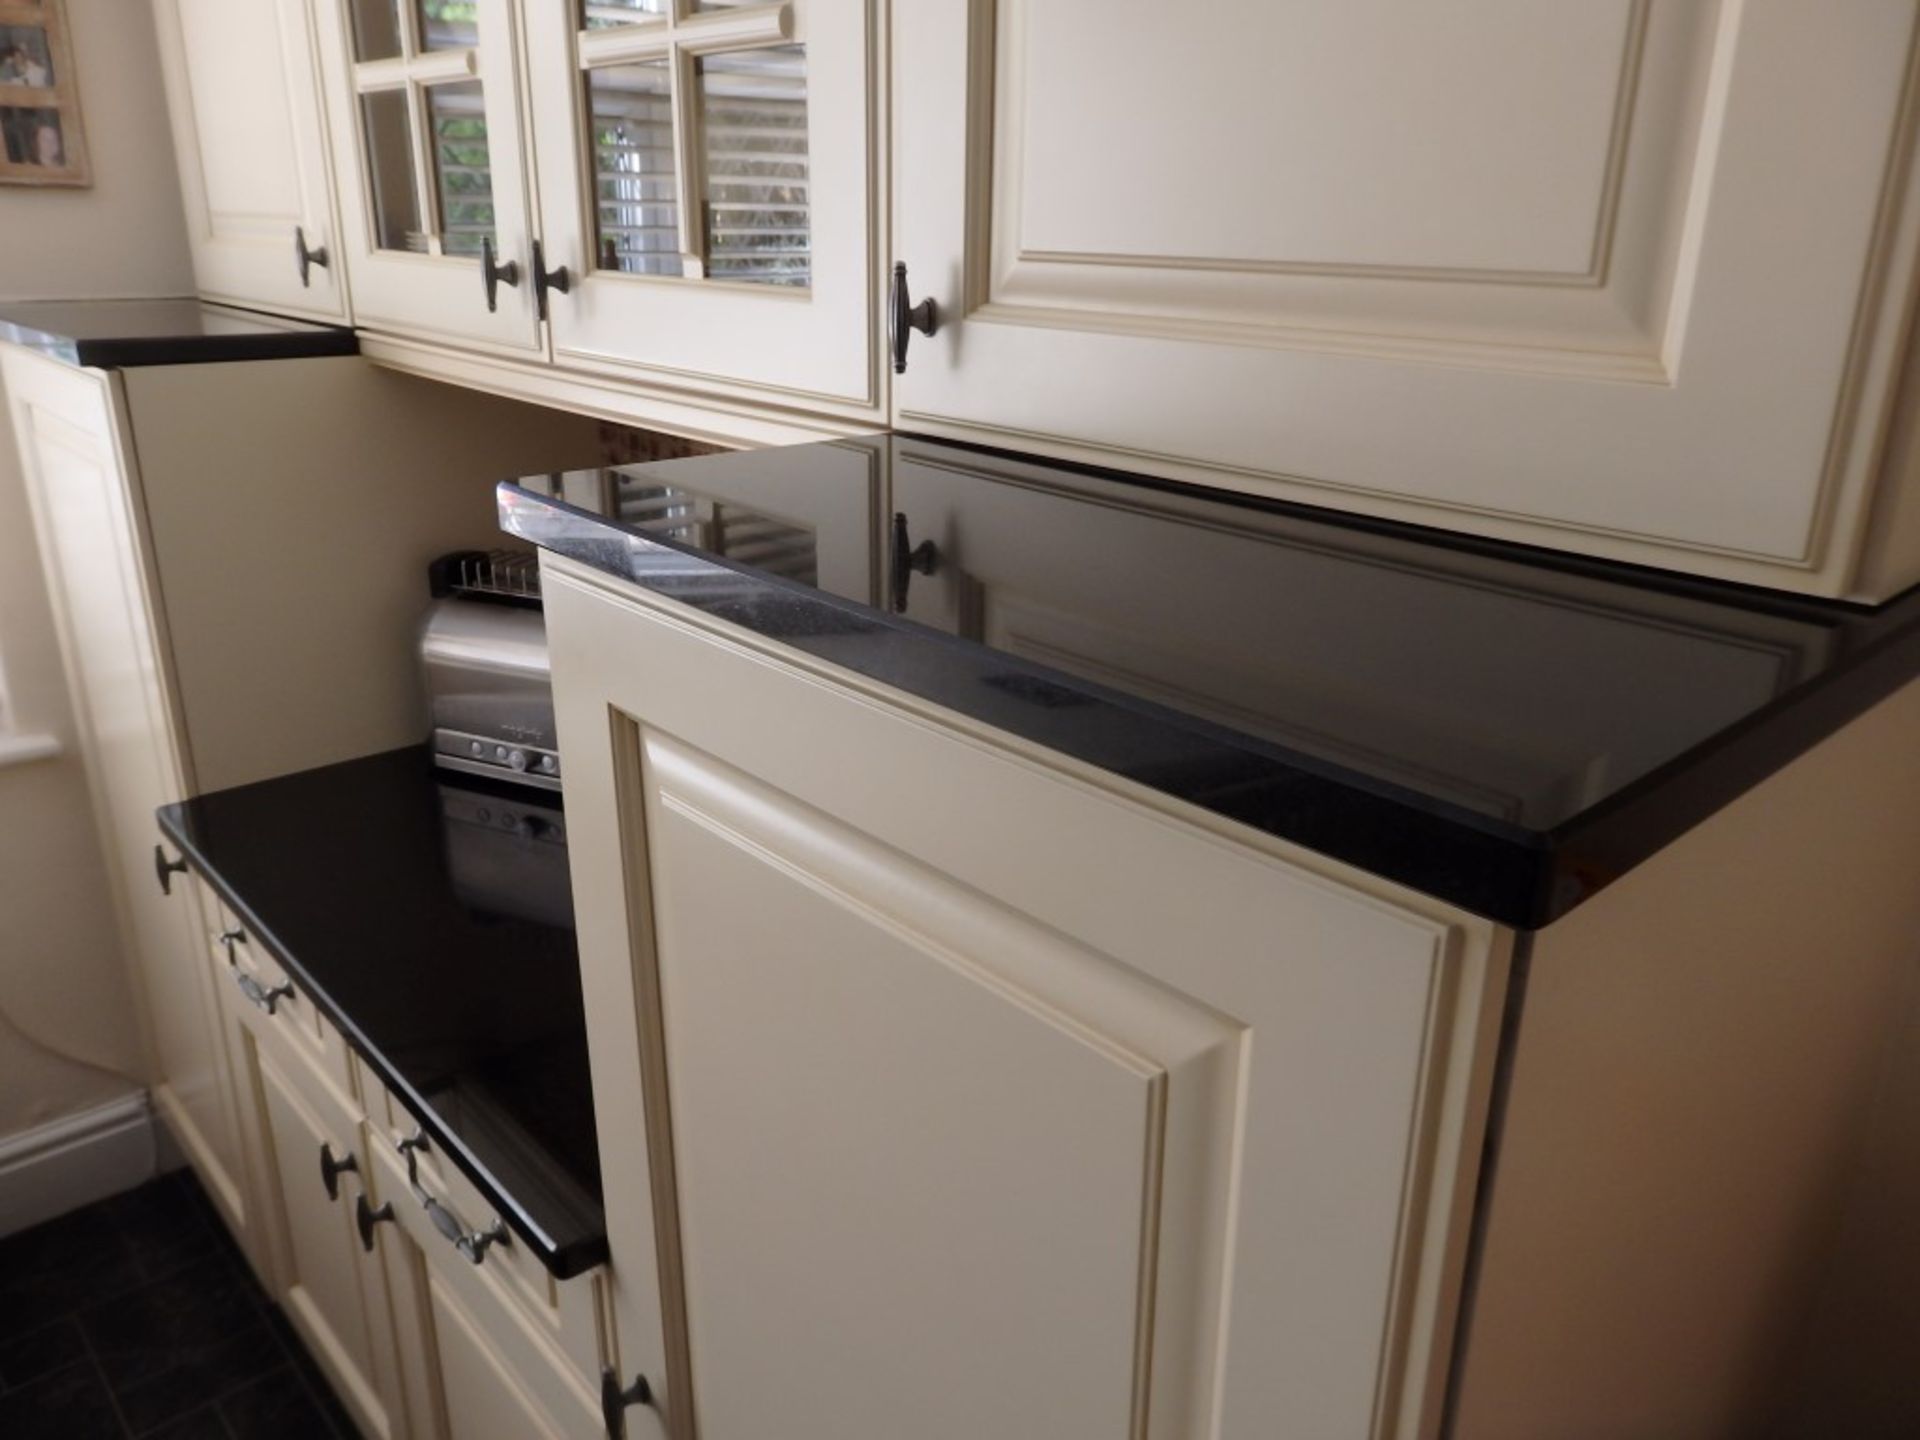 1 x Traditional Style Cream Kitchen With Luxurious Black Granite Worktops - Includes Freezer & - Image 10 of 31